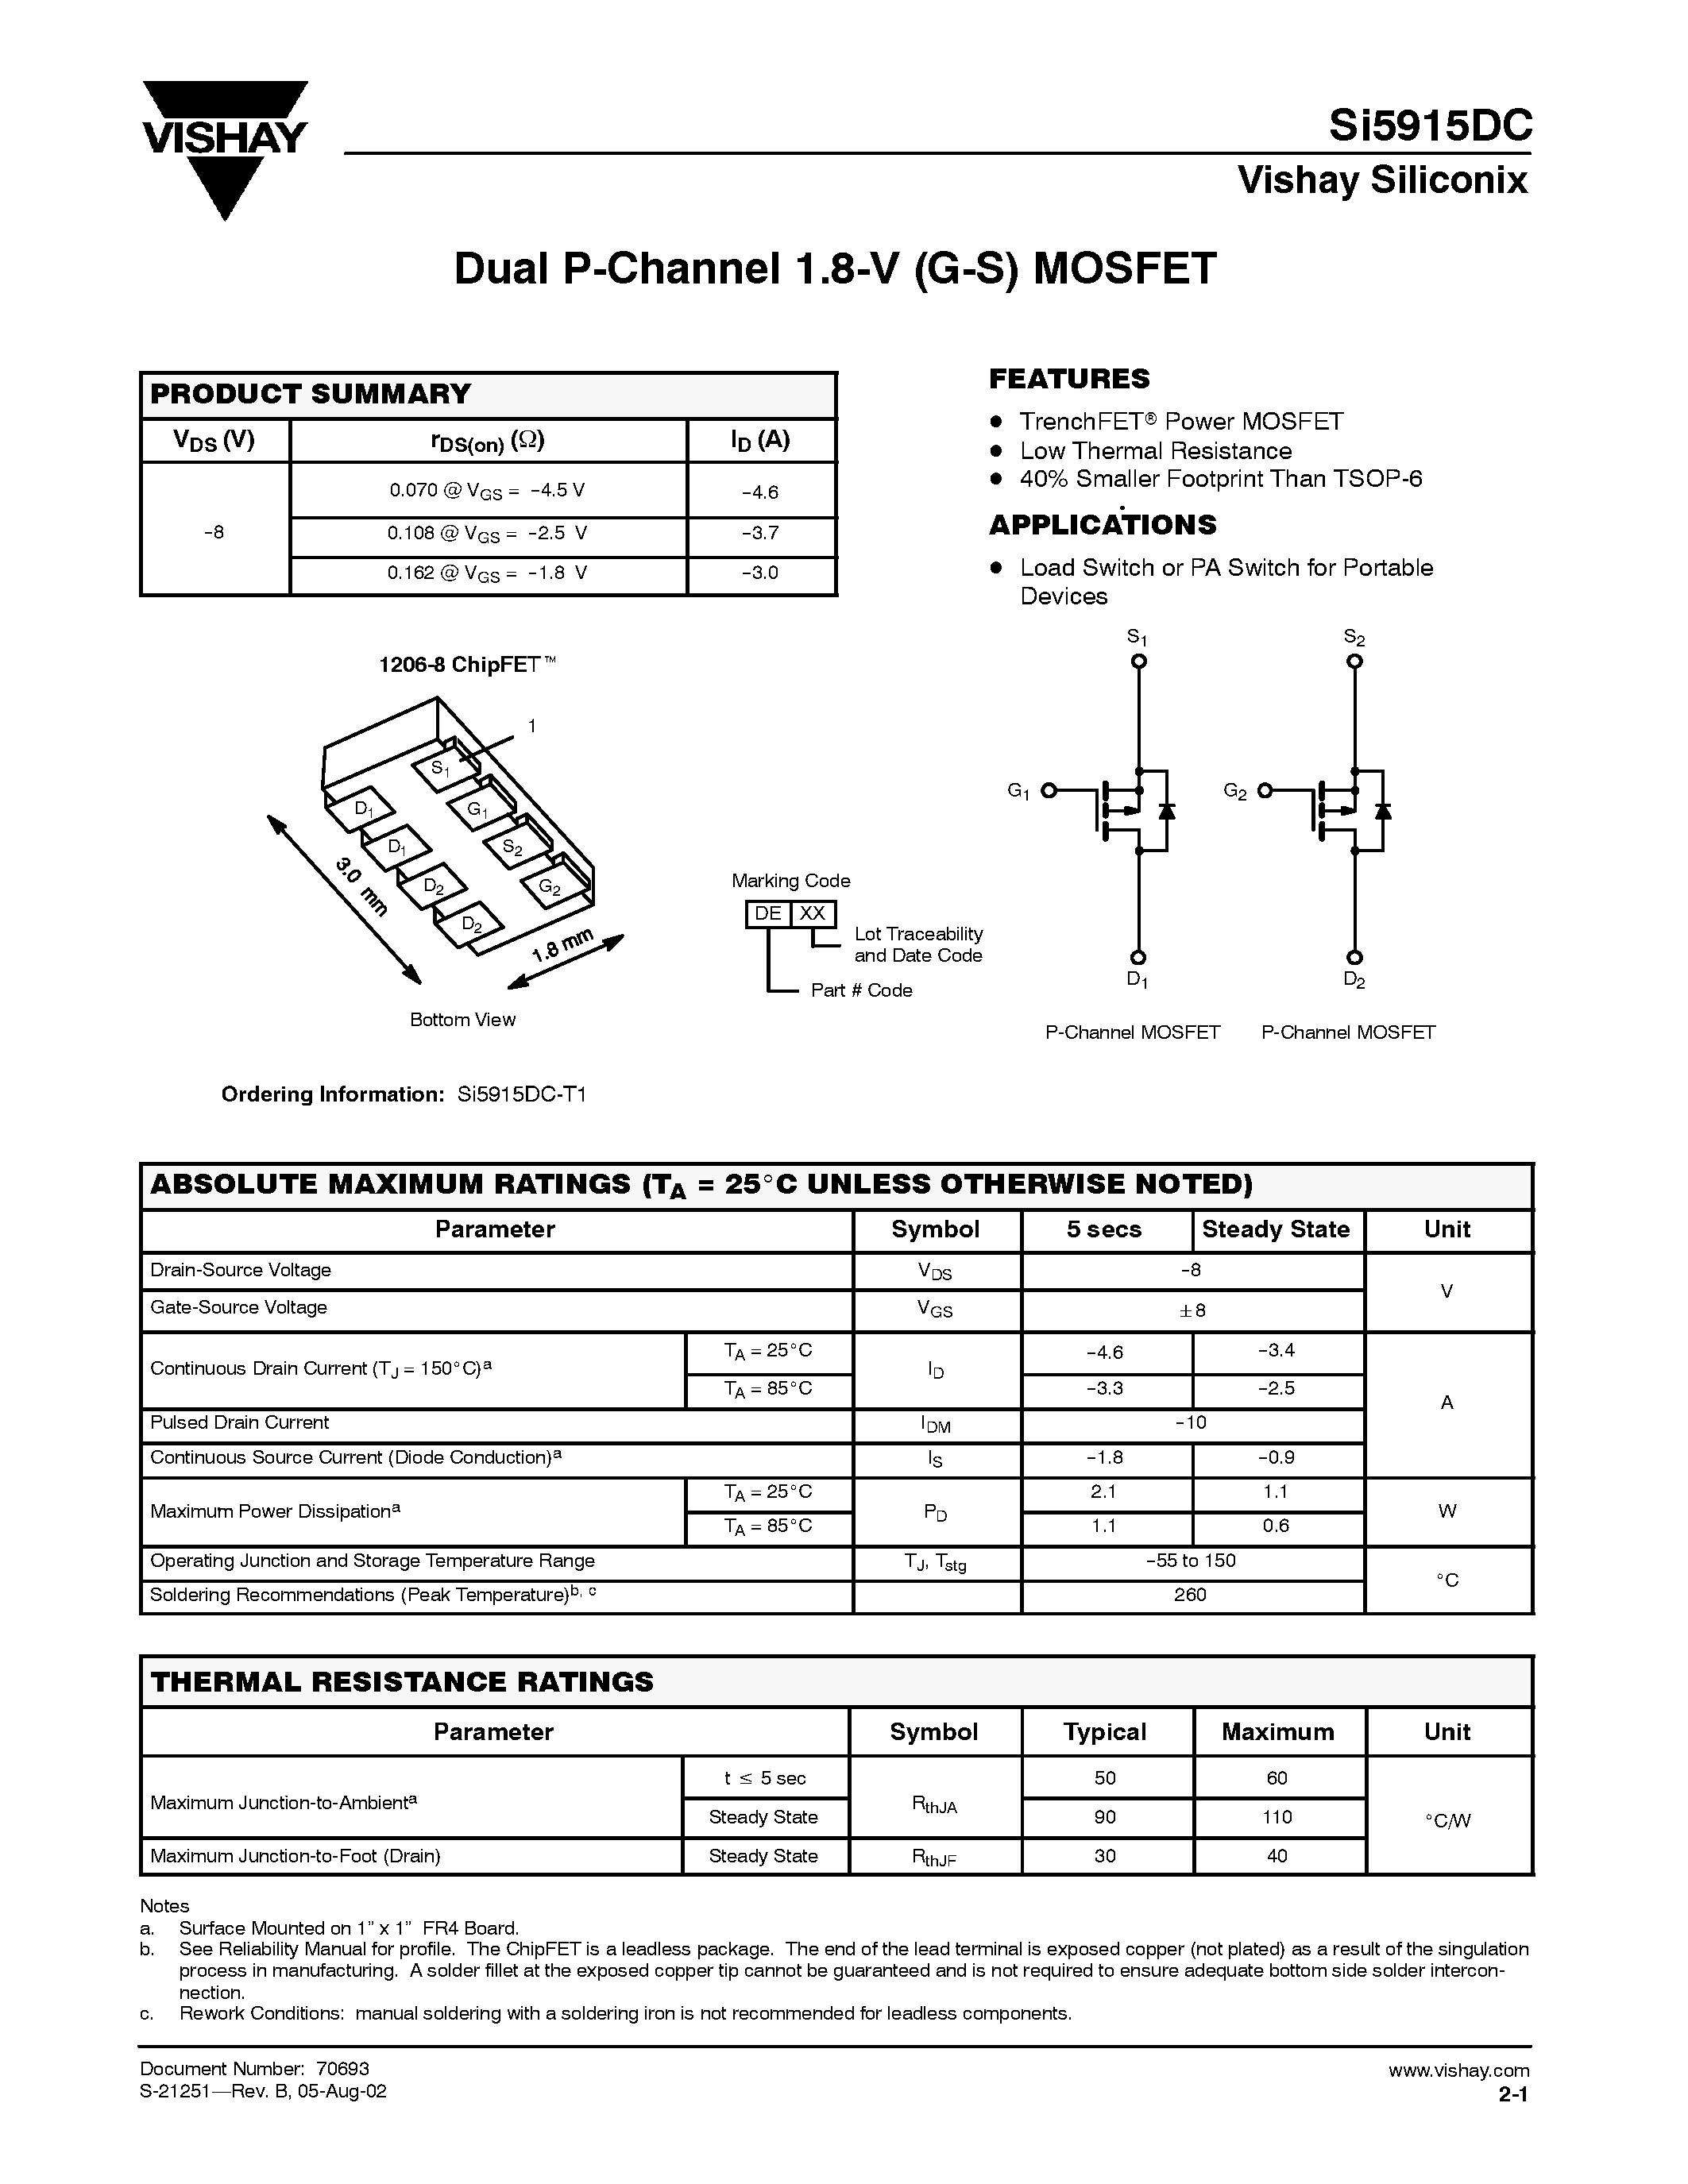 Даташит SI5915DC-T1 - Dual P-Channel 1.8-V (G-S) MOSFET страница 1